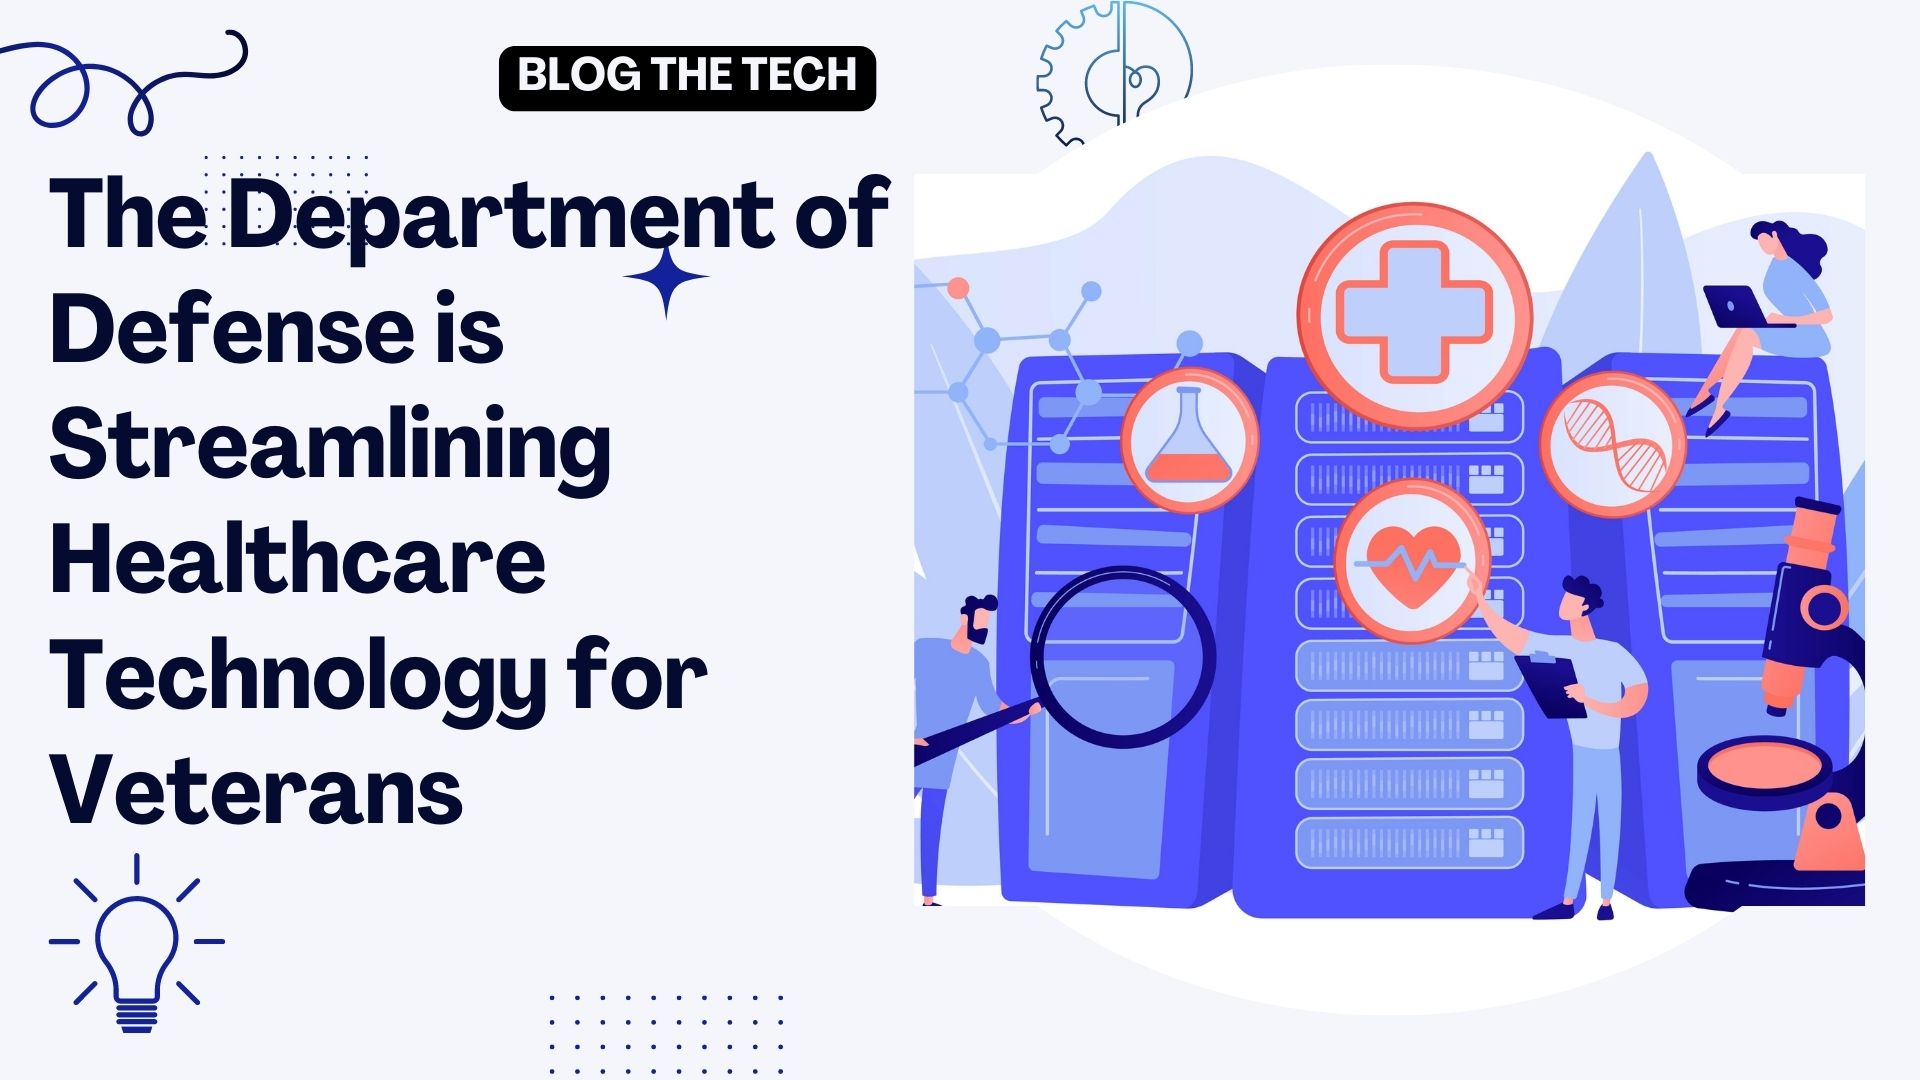 The Department of Defense is Streamlining Healthcare Technology for Veterans